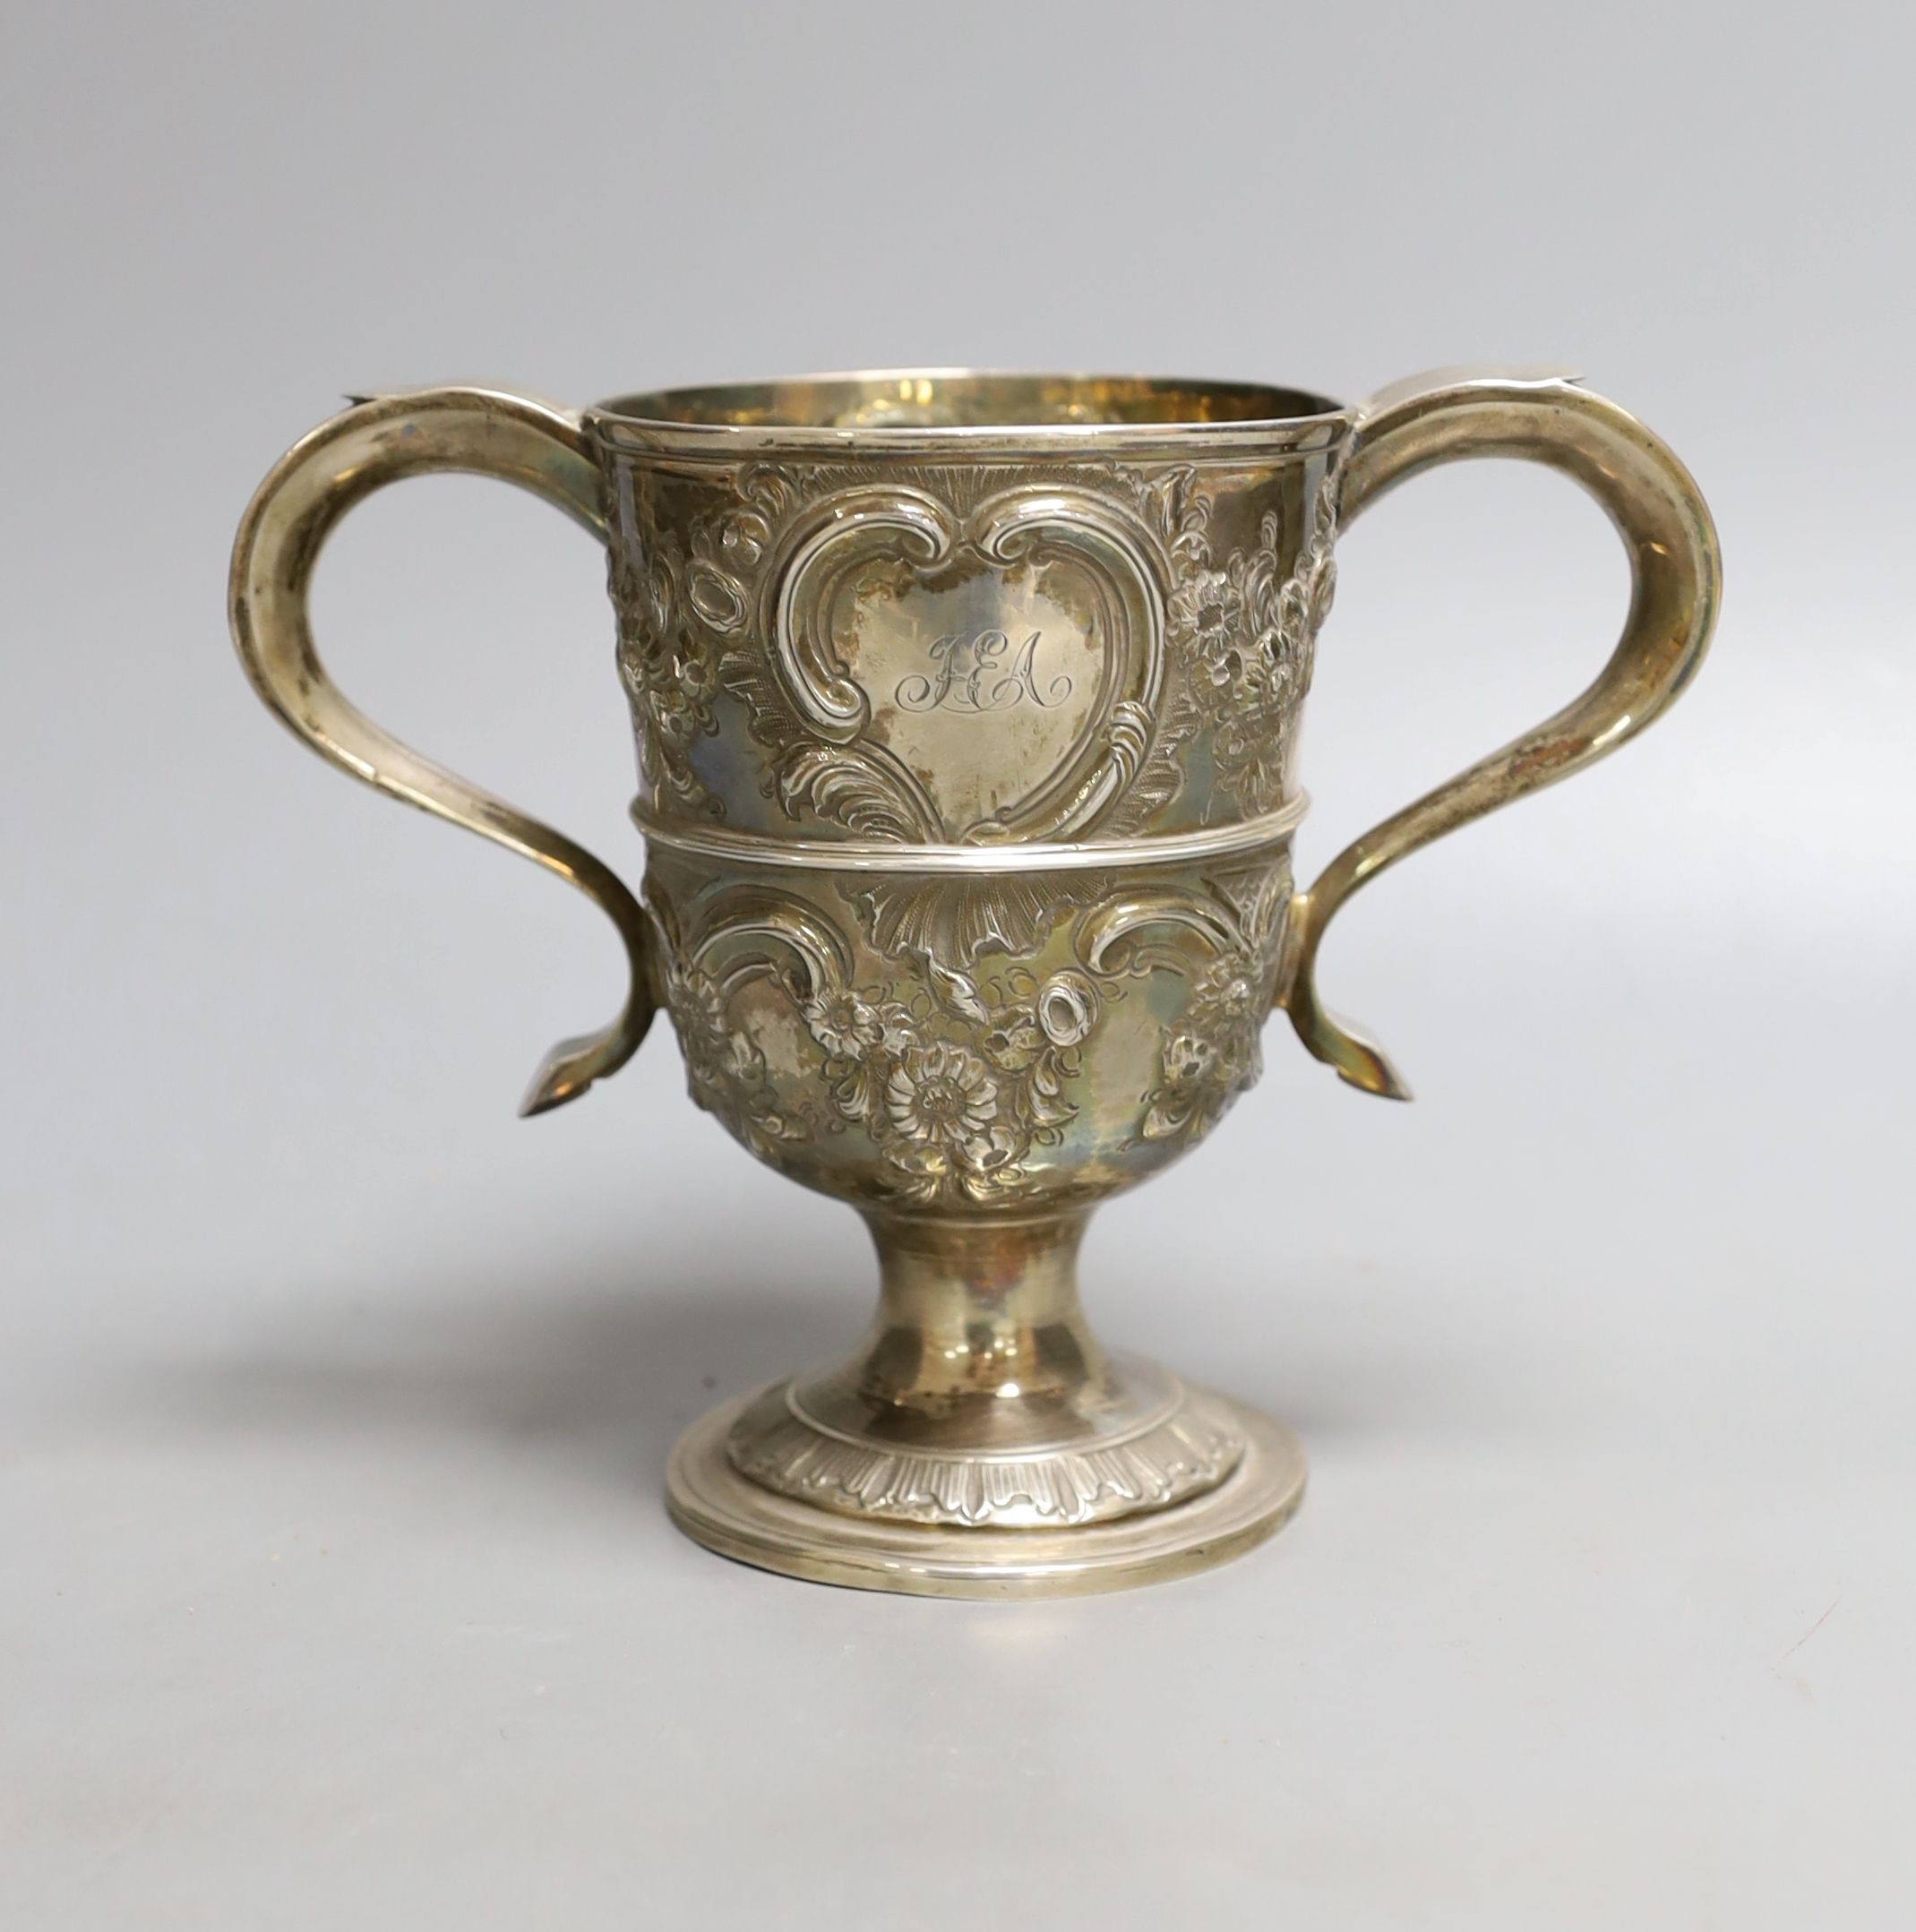 A George III provincial silver two handled pedestal cup, with later embossed decoration, Langlands & Robertson Newcastle, 1794, height 14.7cm, 10.5oz.